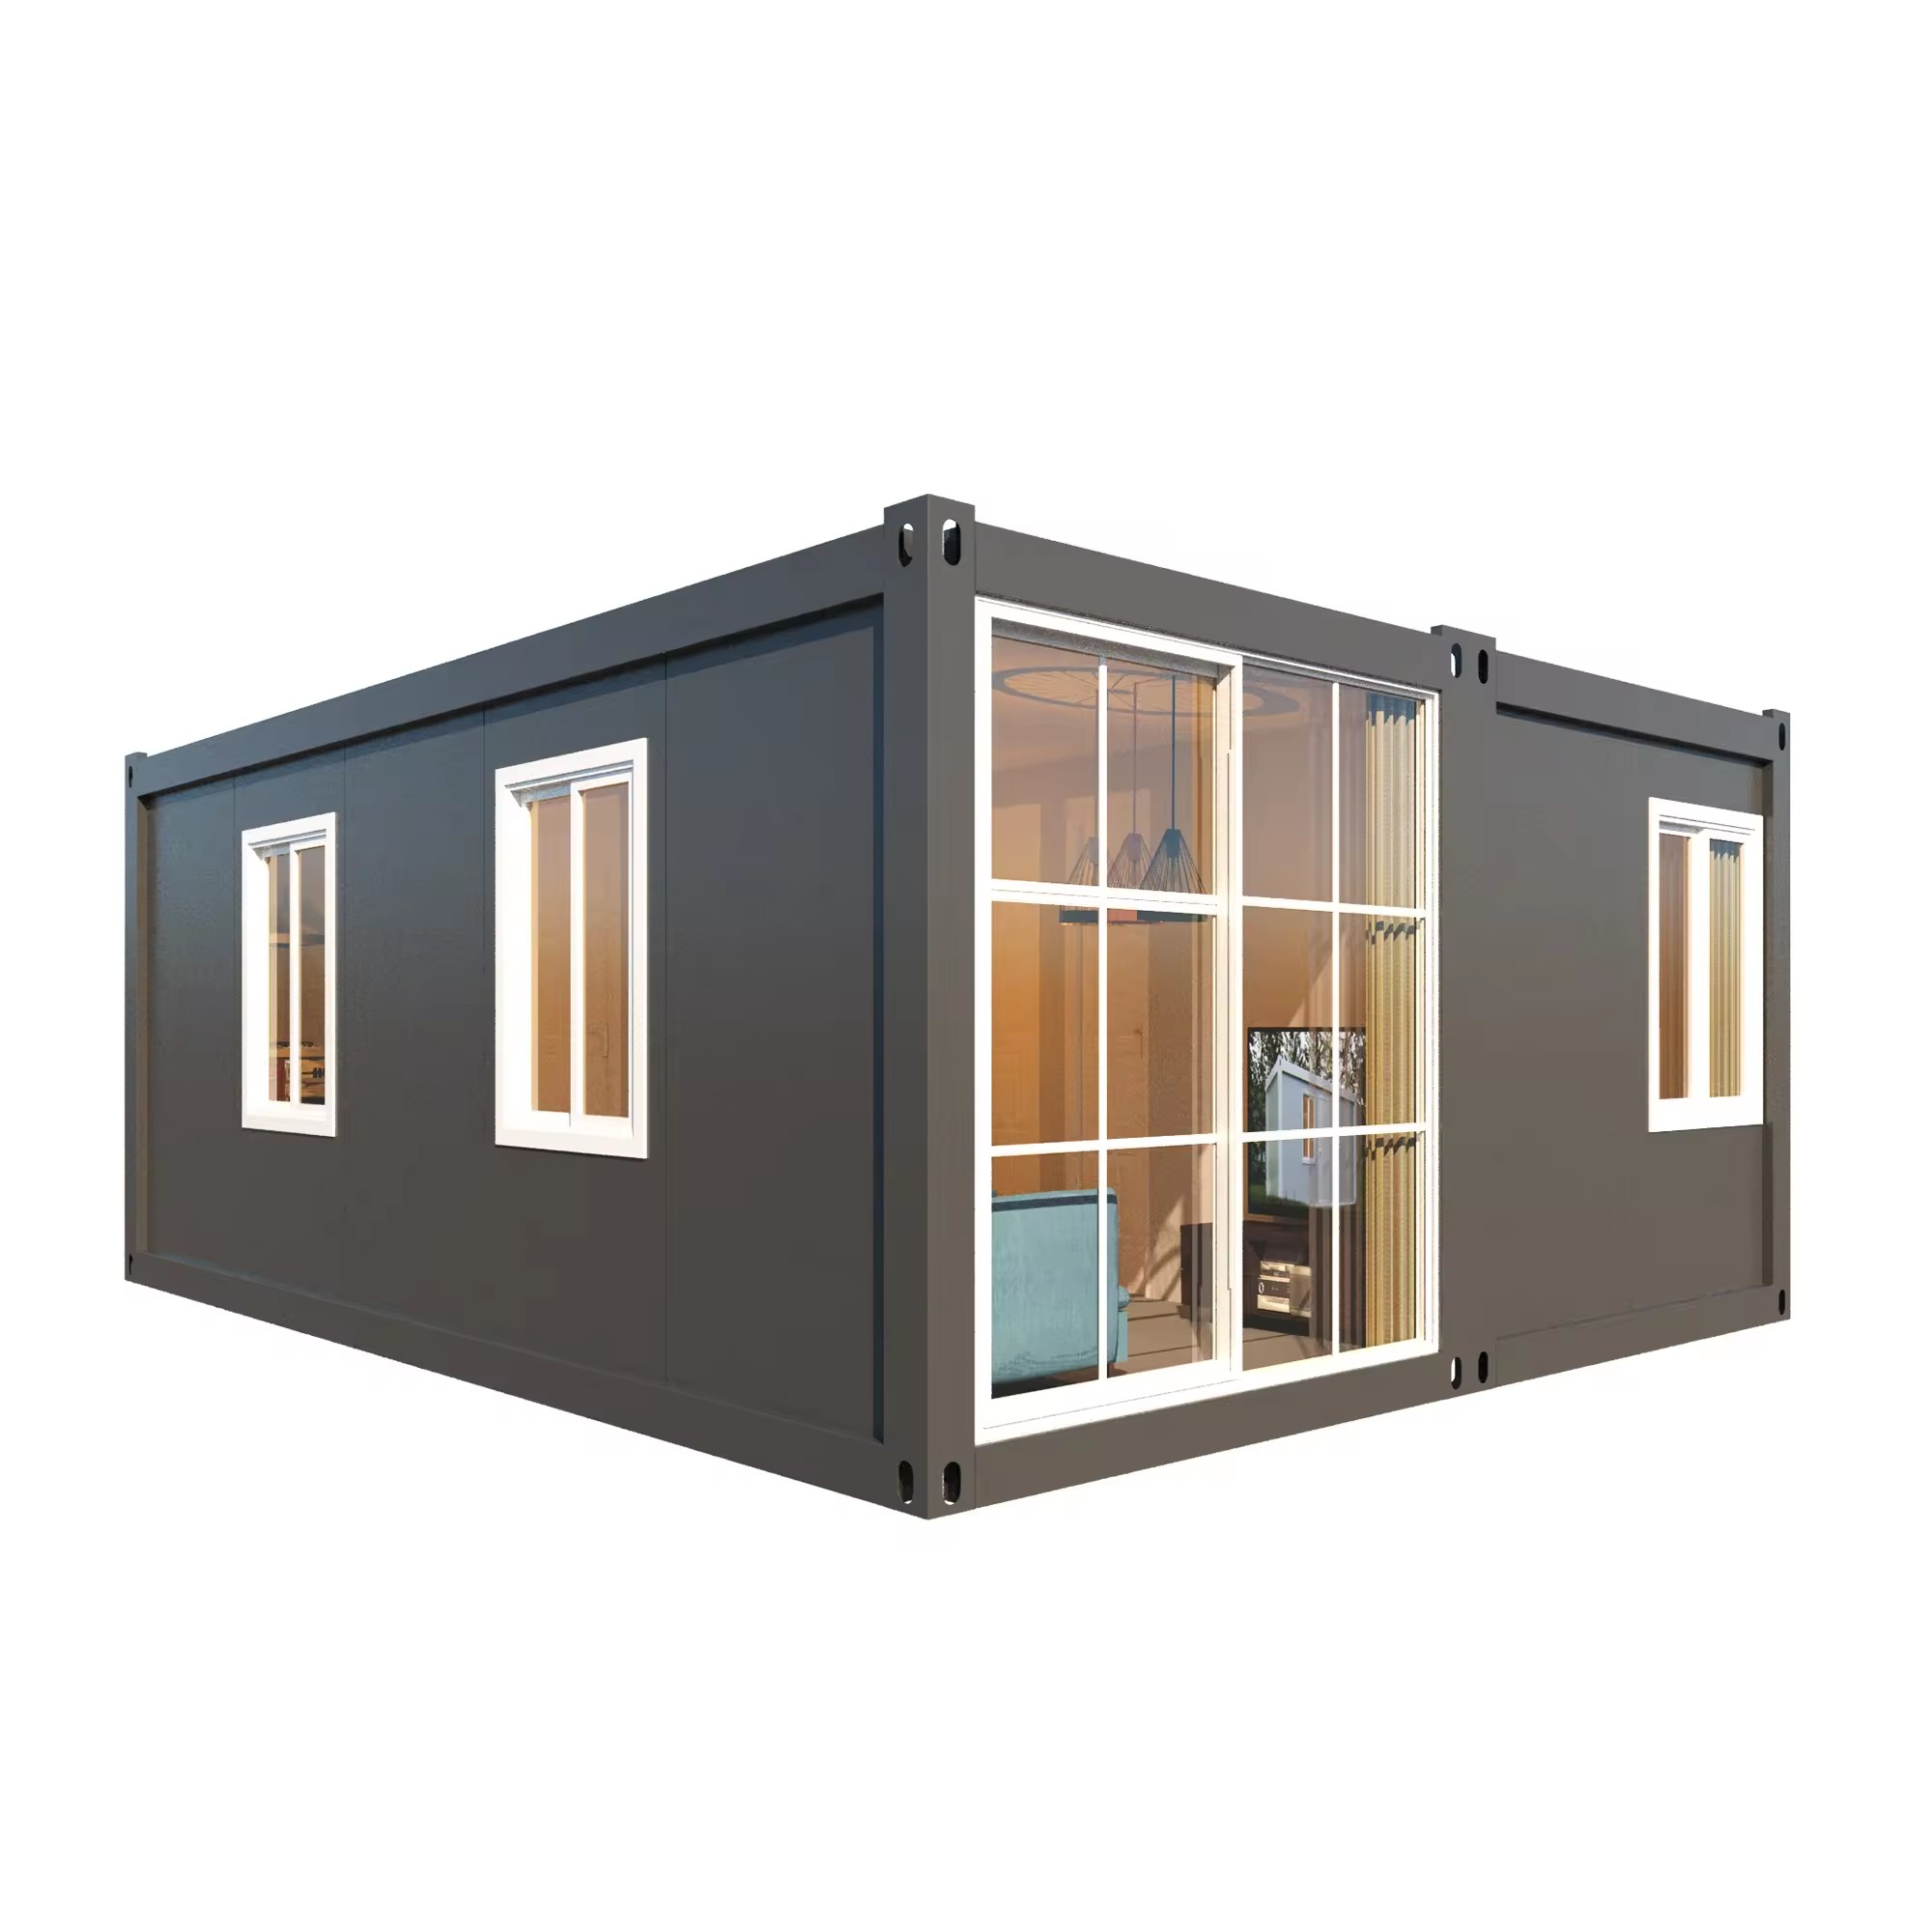 What is container modular house